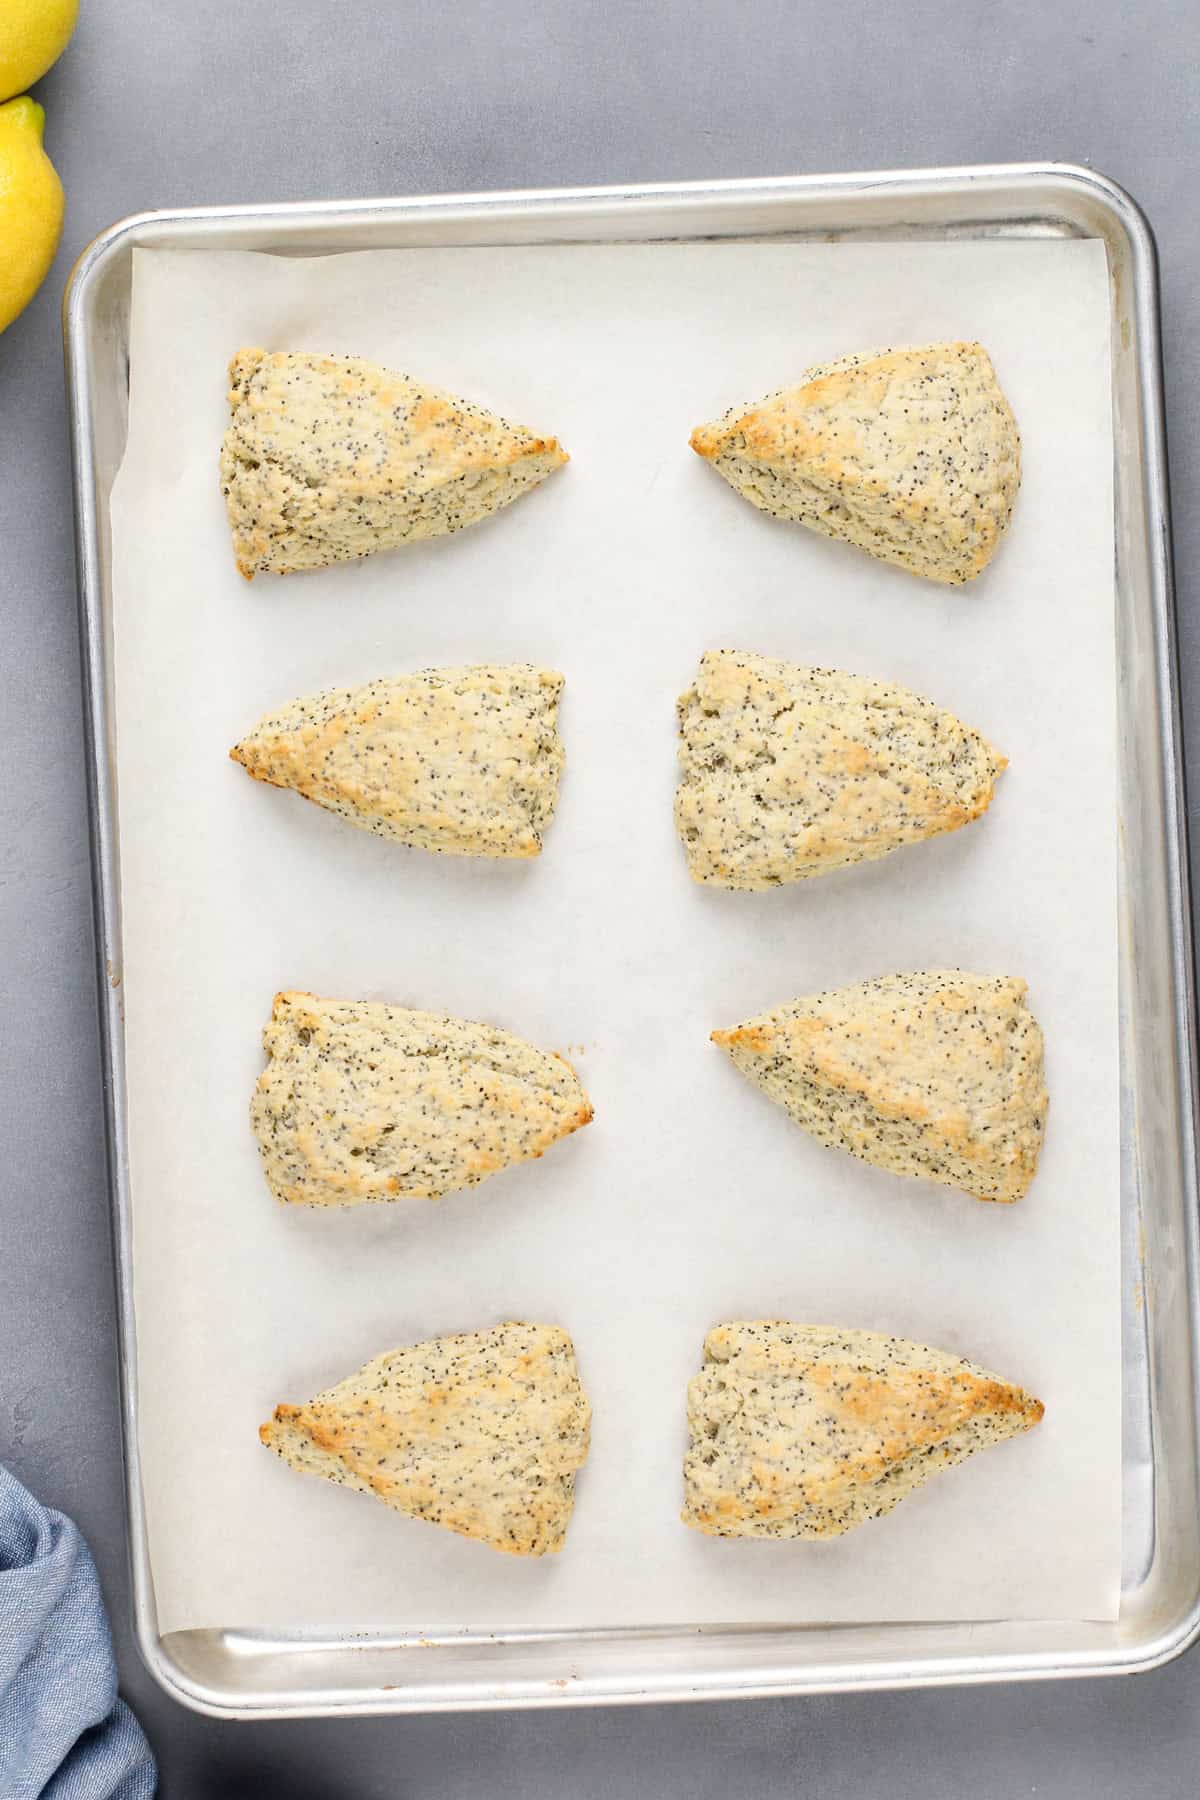 Baked lemon poppy seed scones cooling on a lined baking sheet.